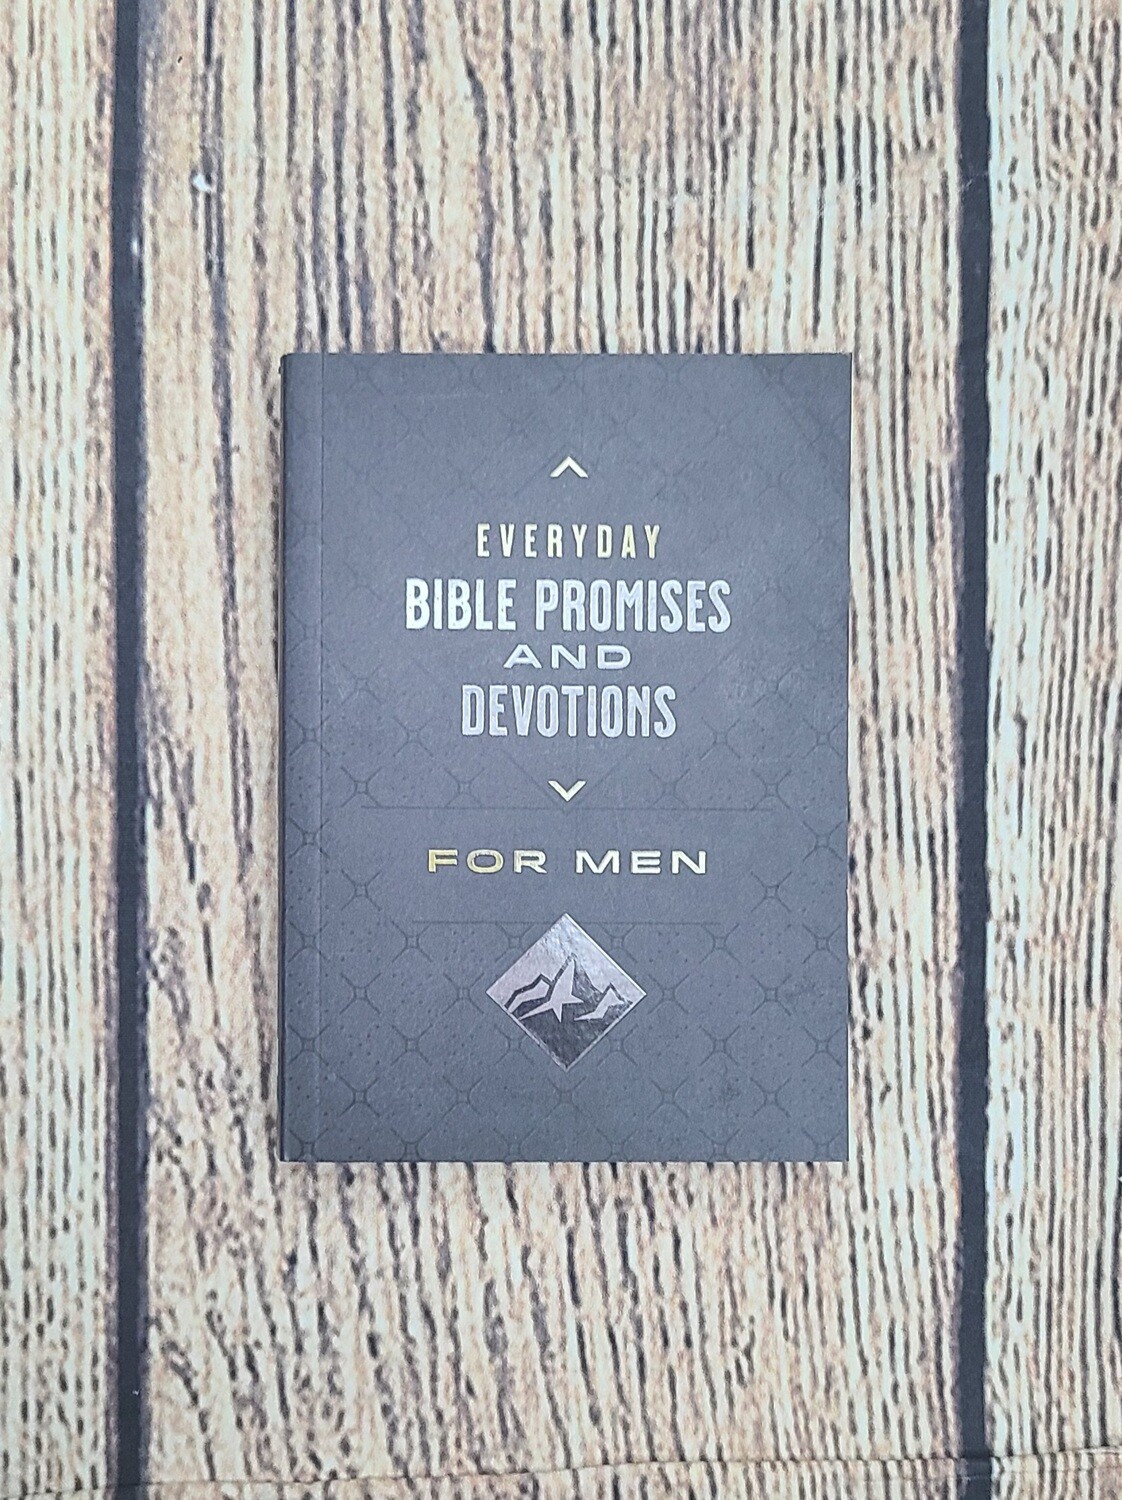 Everyday Bible Promises and Devotions for Men by Barbour Publishing